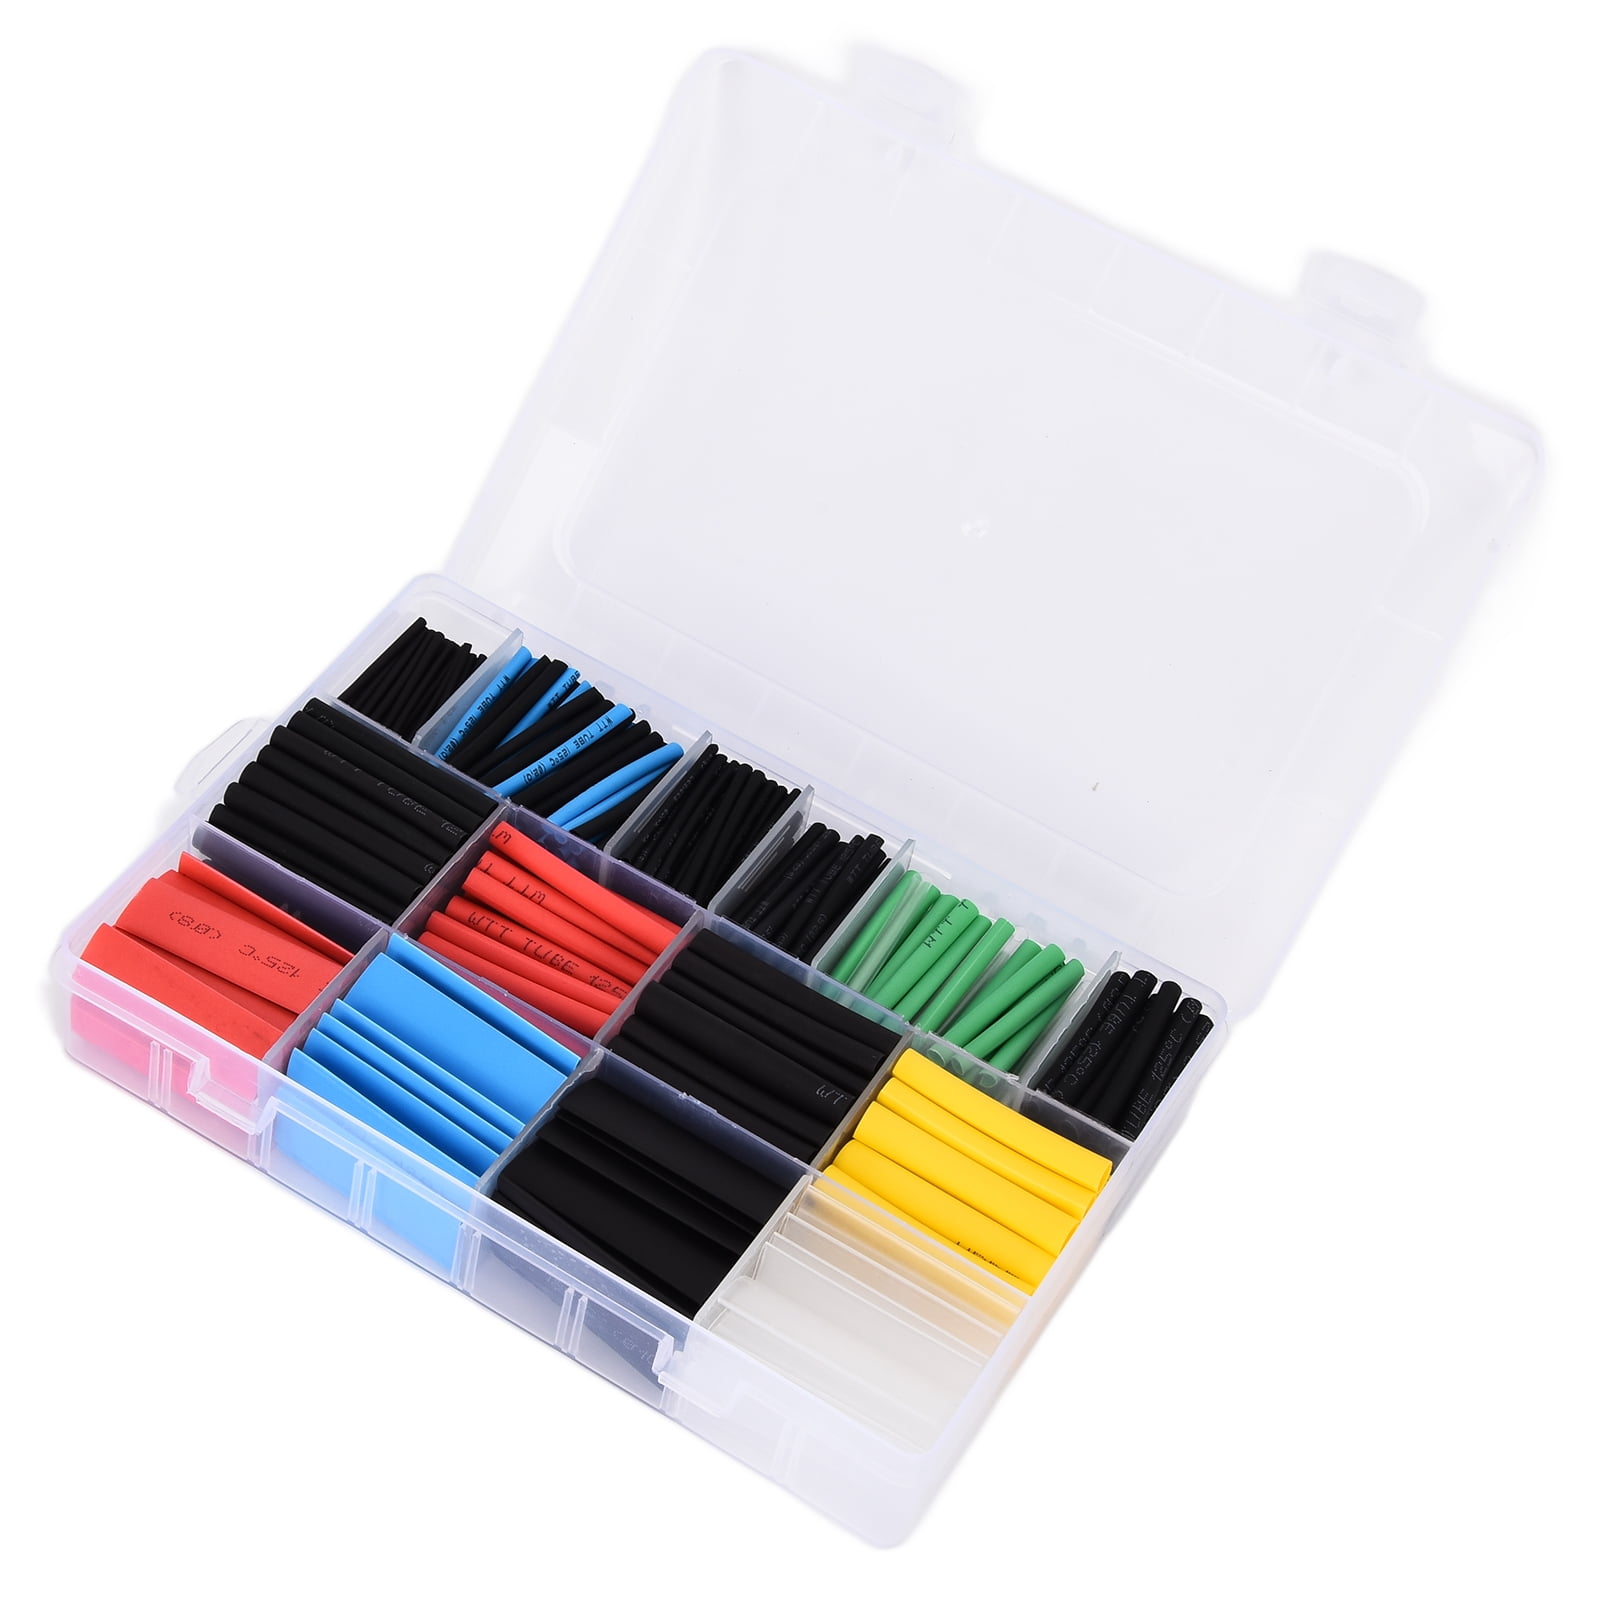 Electrical Wire Wrap Assortment Kit, Heat Shrink Tubing Kit 2:1 ...